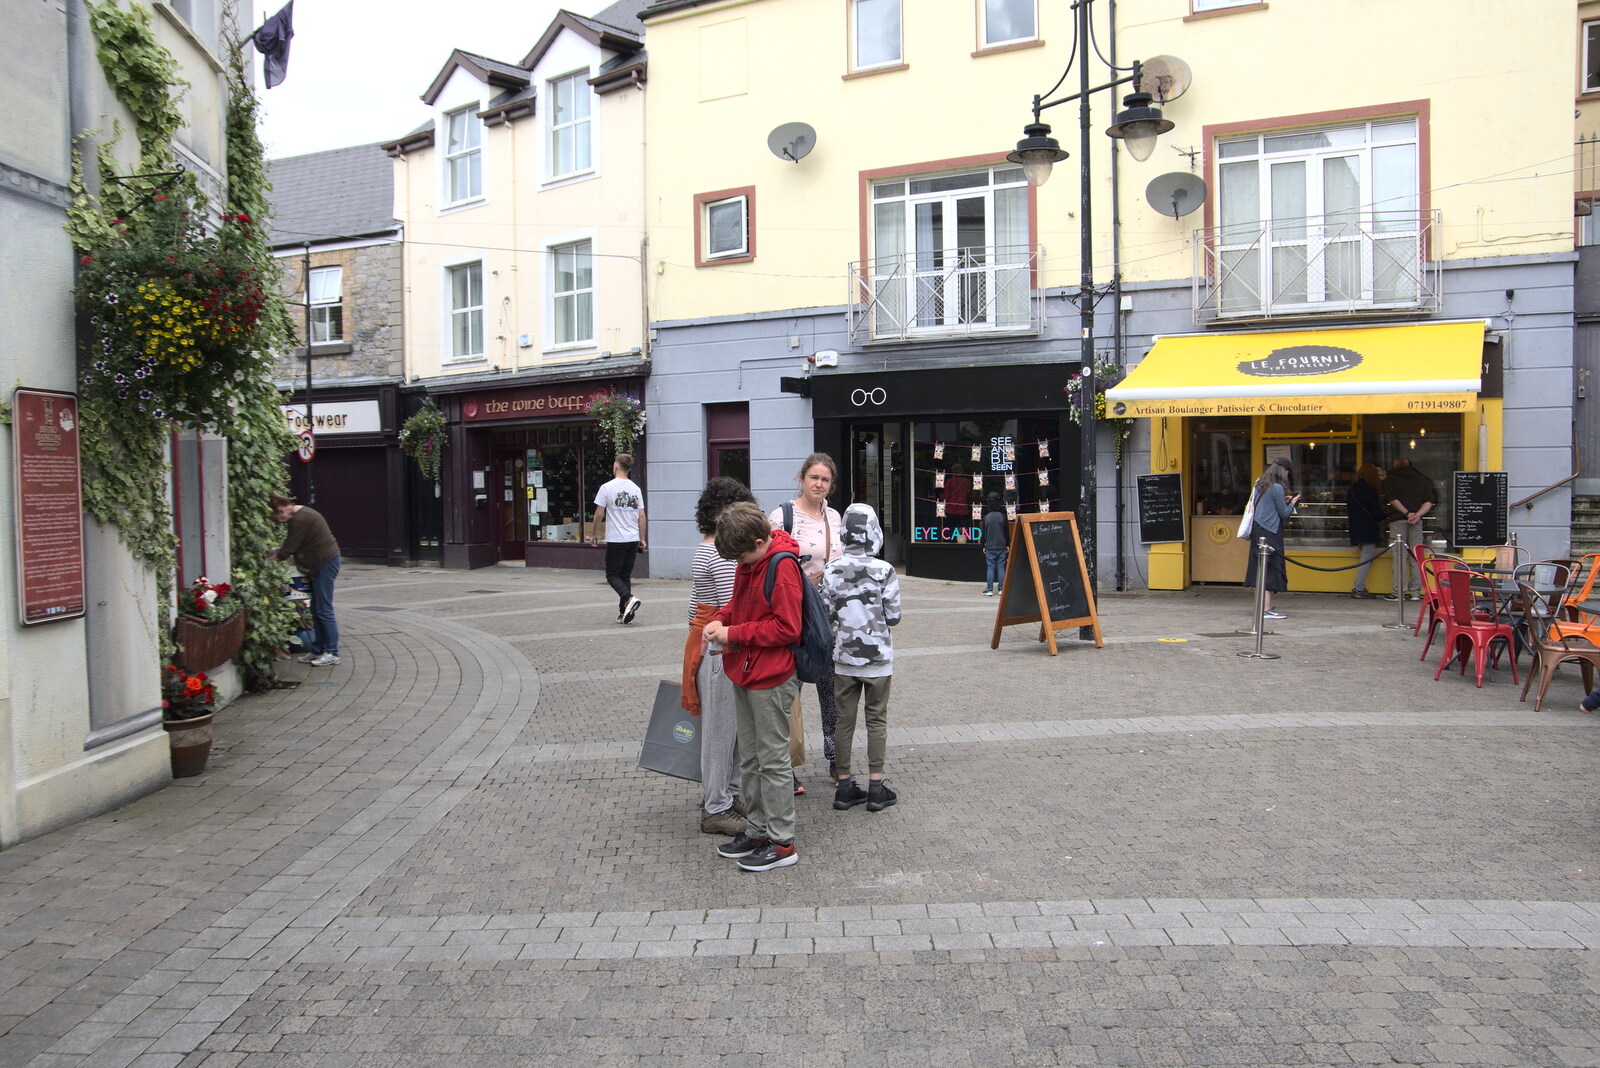 A Trip to Manorhamilton, County Leitrim, Ireland - 11th August 2021: Water Street and the Italian Quarter